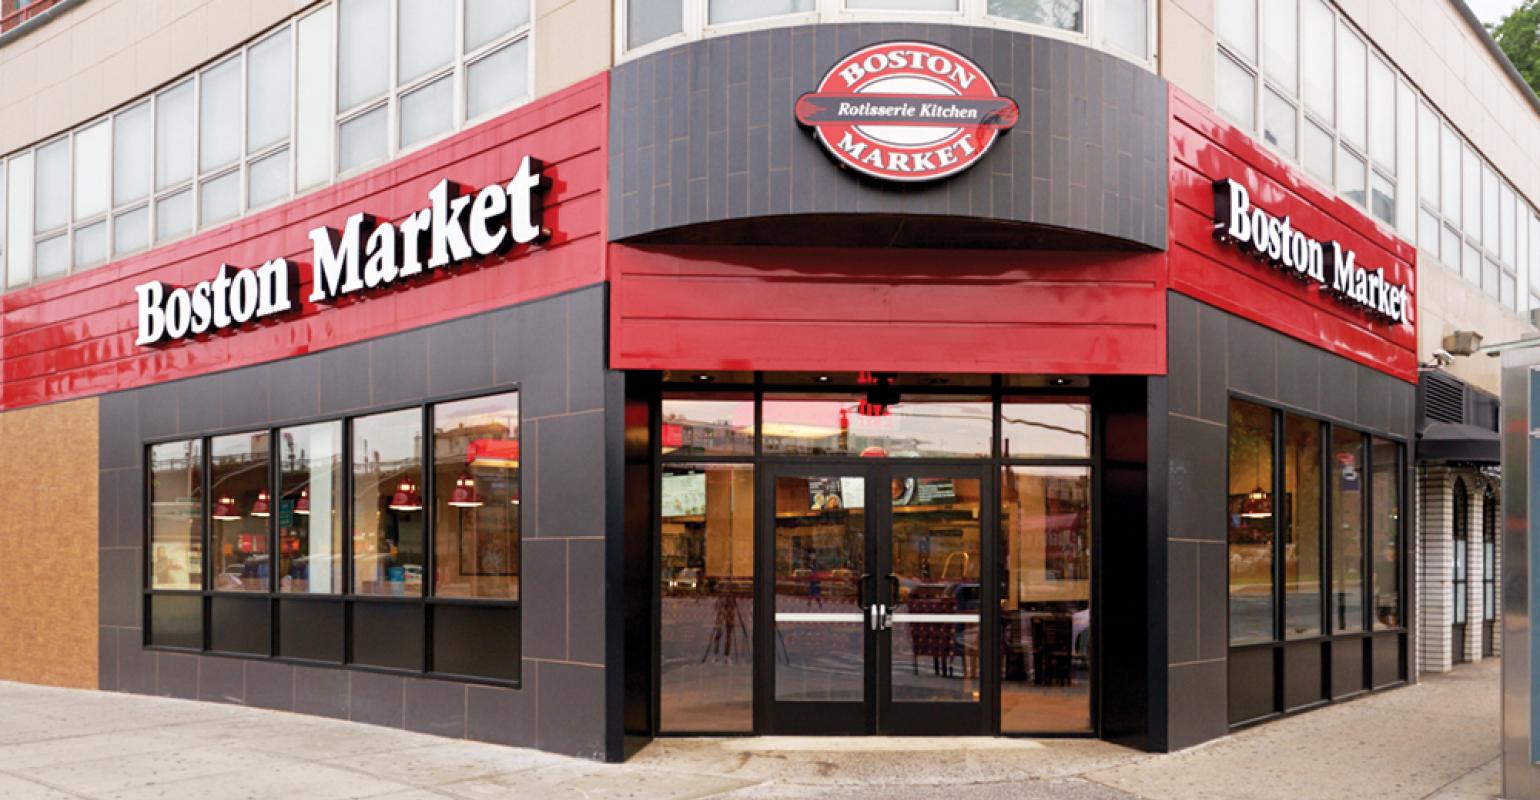 Boston Market menu prices featuring 99 items ranging from $0.69 to $51.54